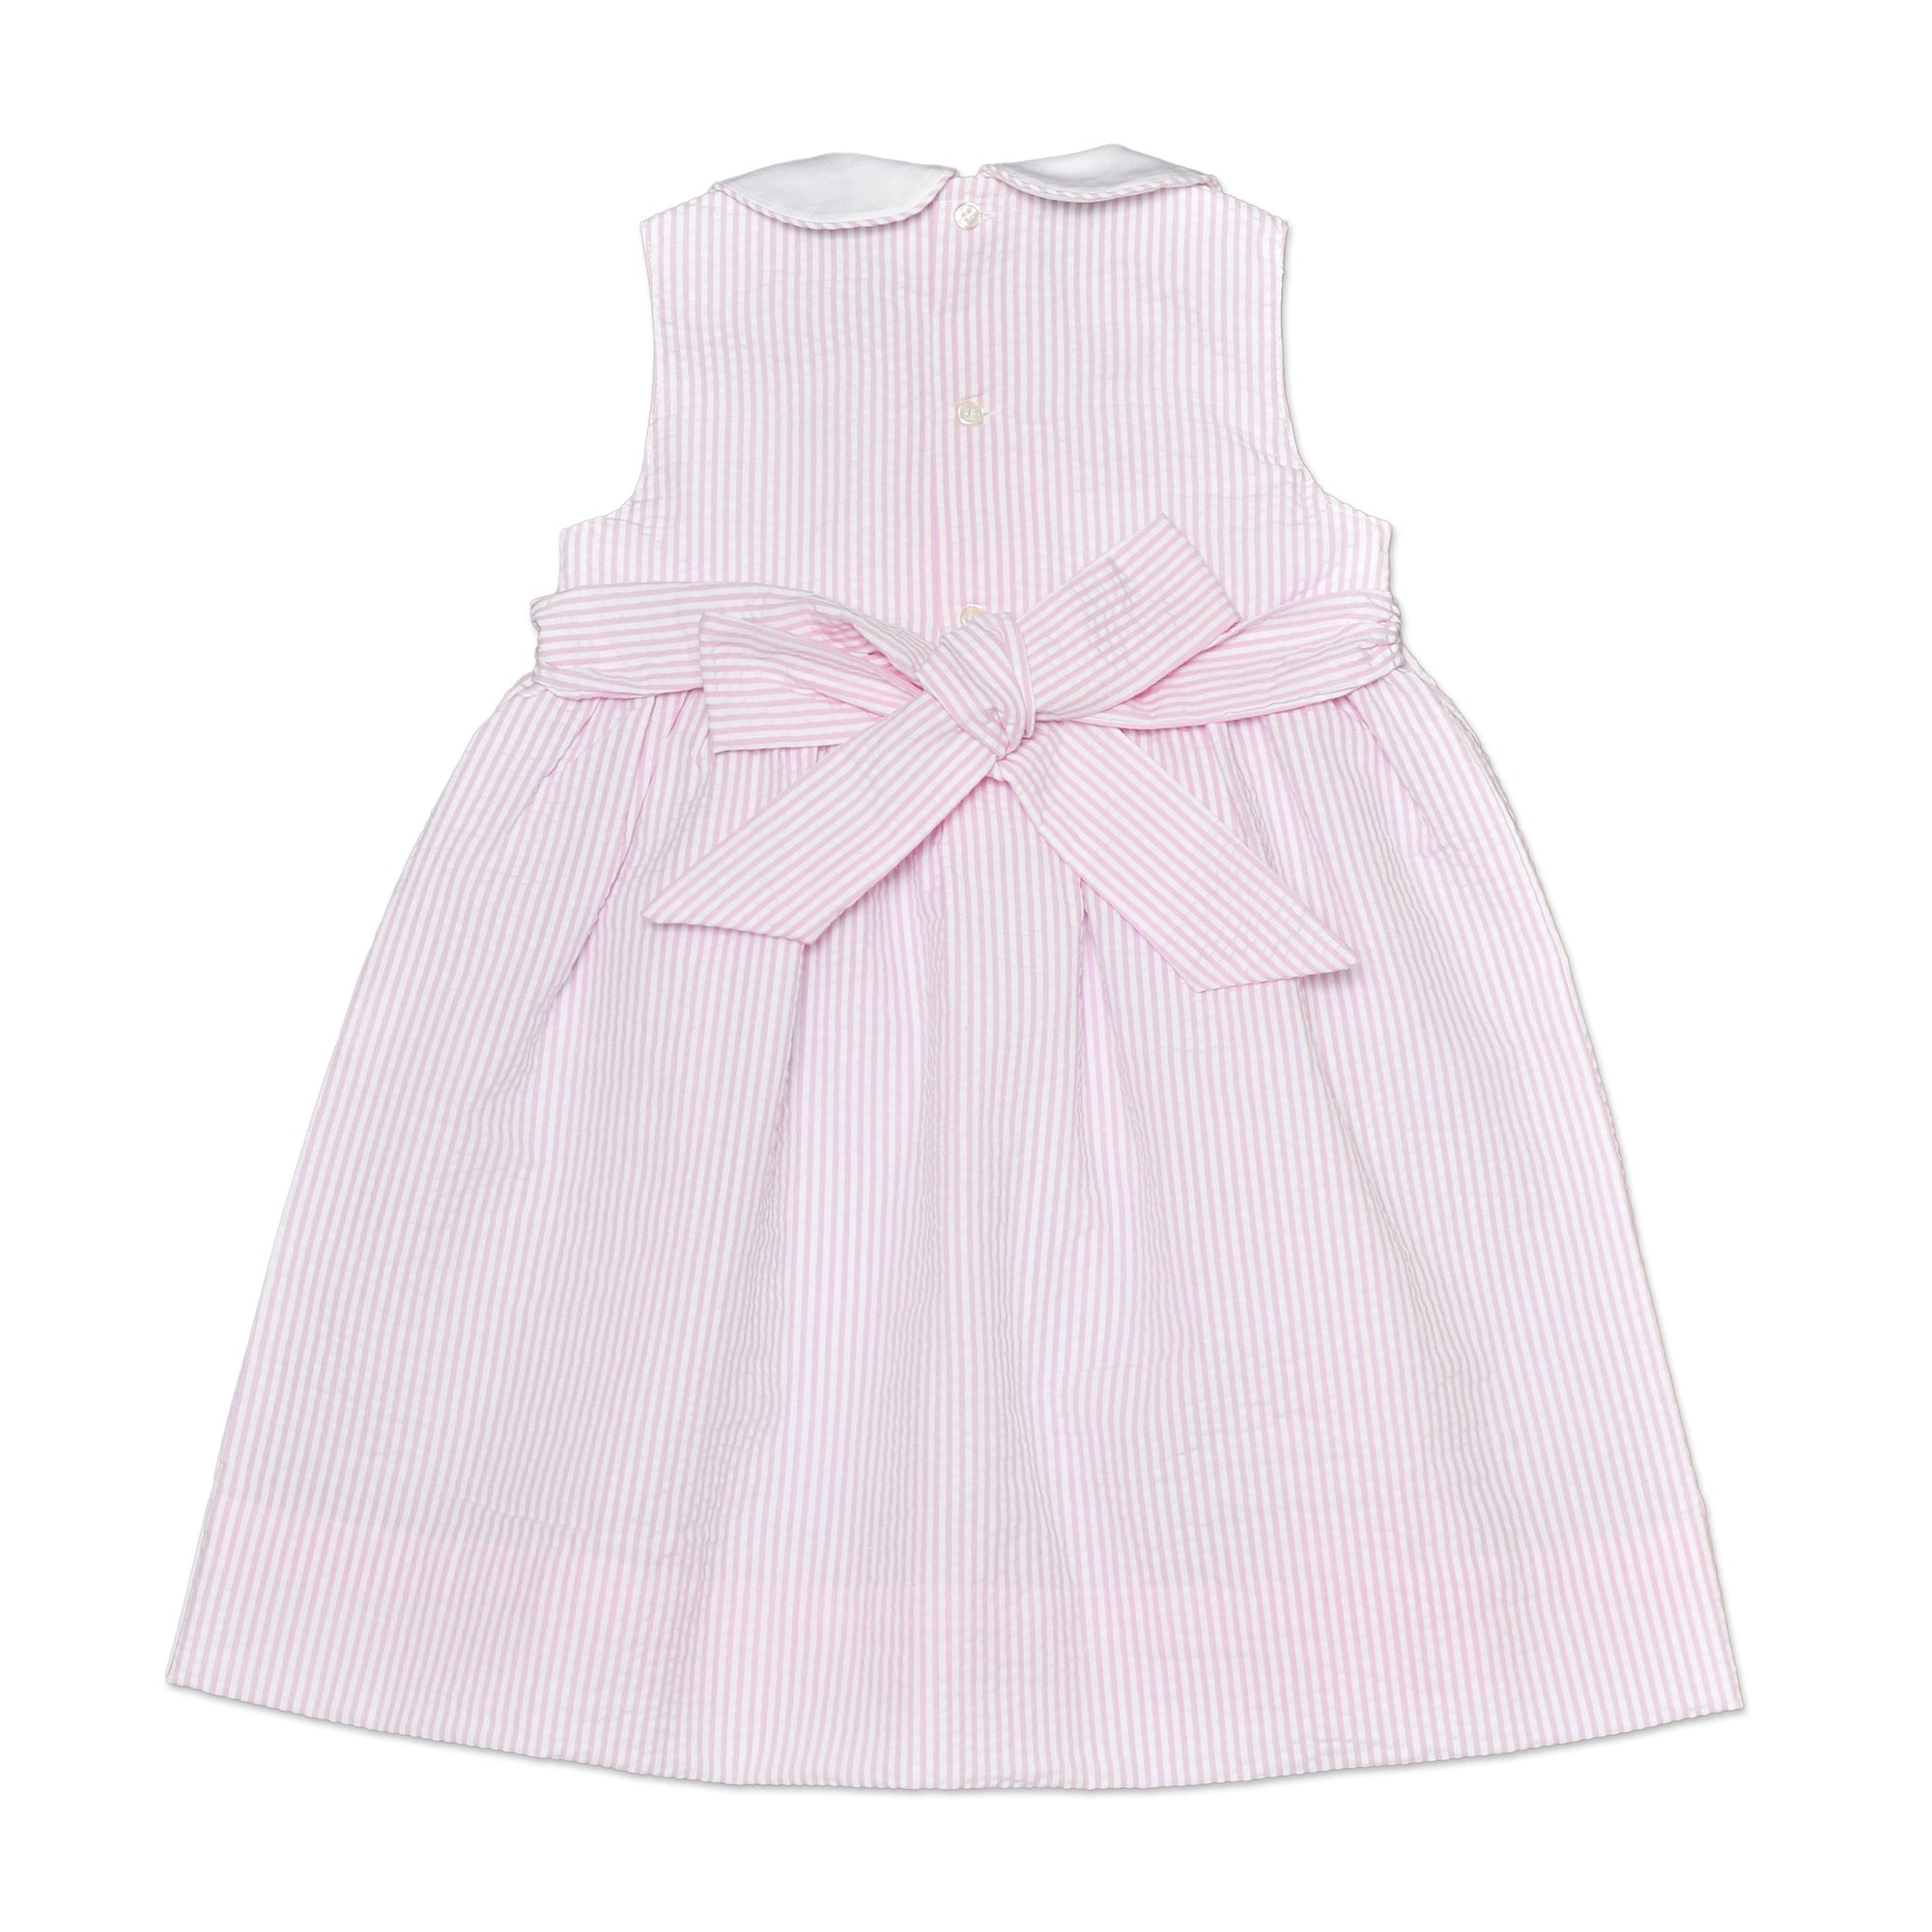 Bella Pink And White Stripe Smock Dress - Cou Cou Baby